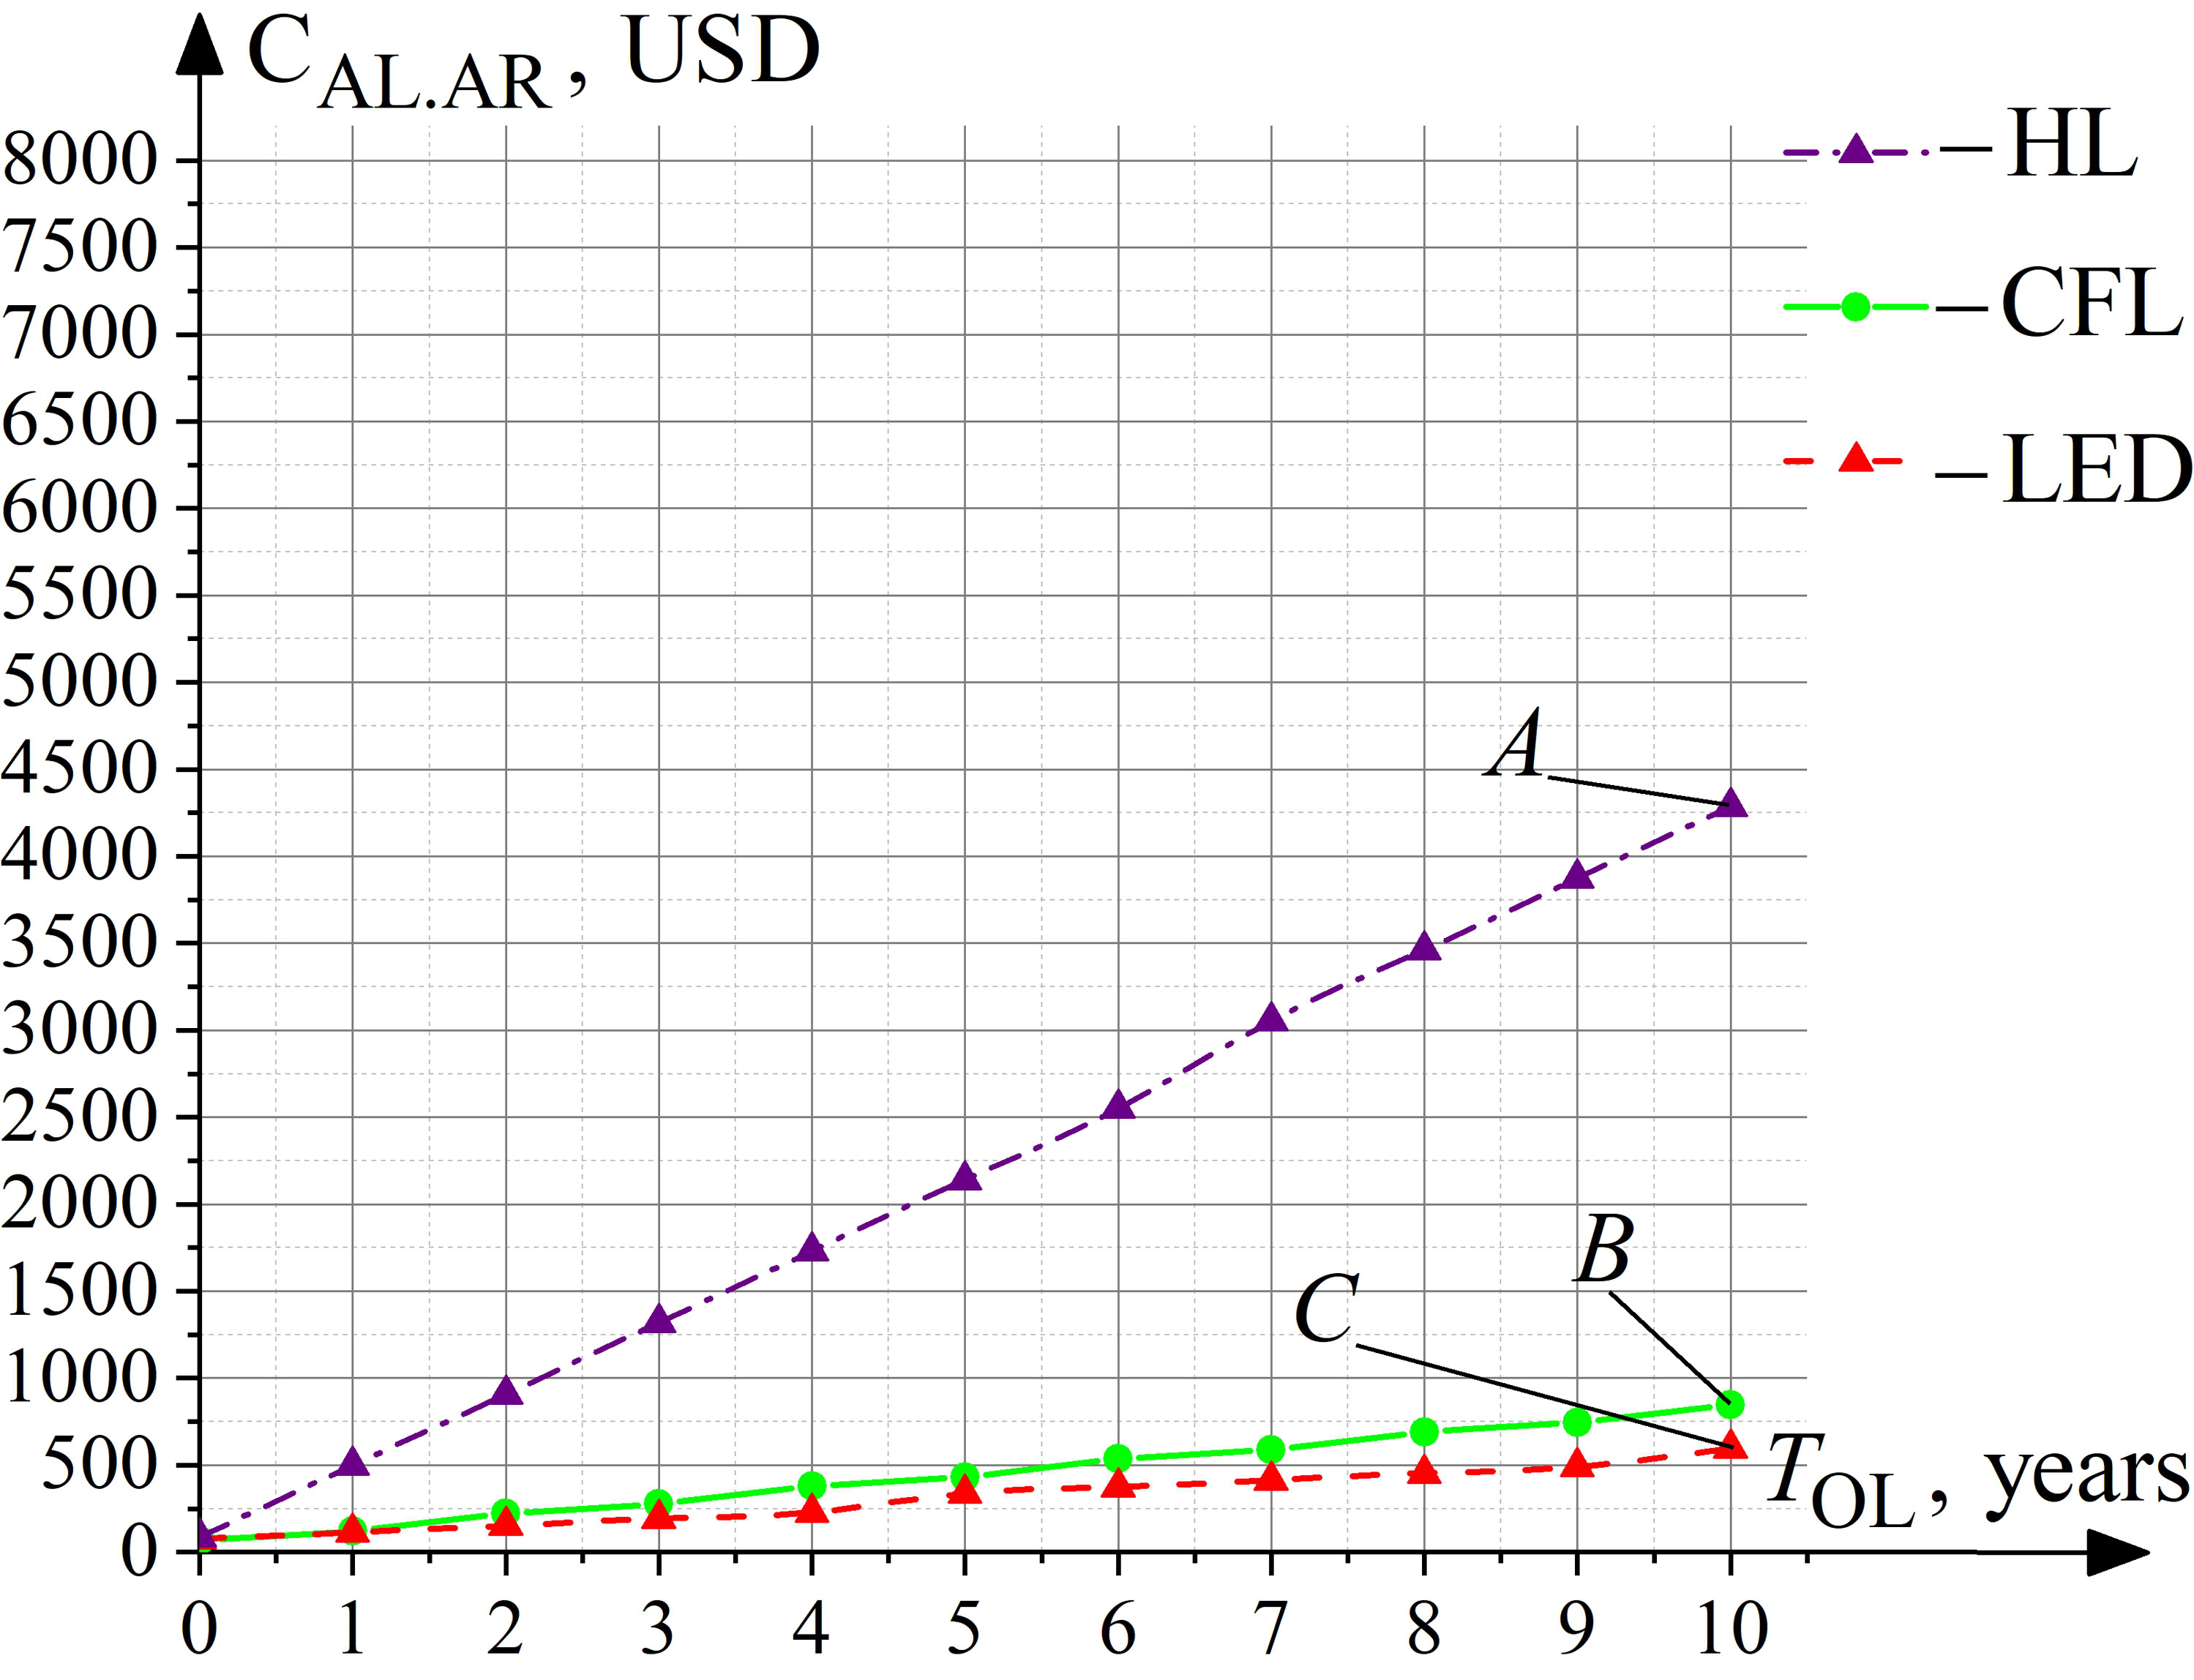 Dependence of the artificial lighting systems ownership cost, which is controlled by the astronomical relay (CAL.AR, USD), from its operating life (TOL, years) for various types of LS.